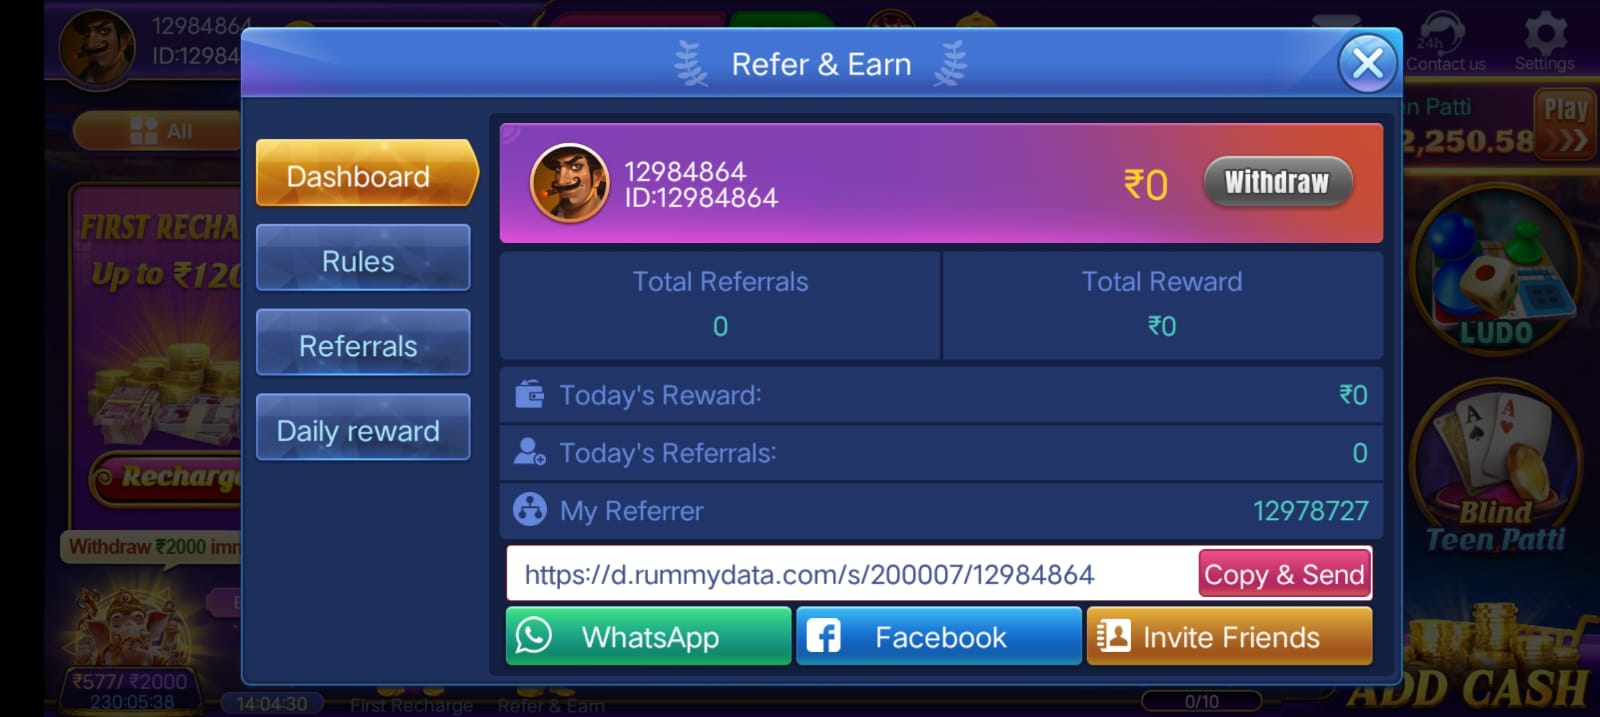 REFER AND EARN